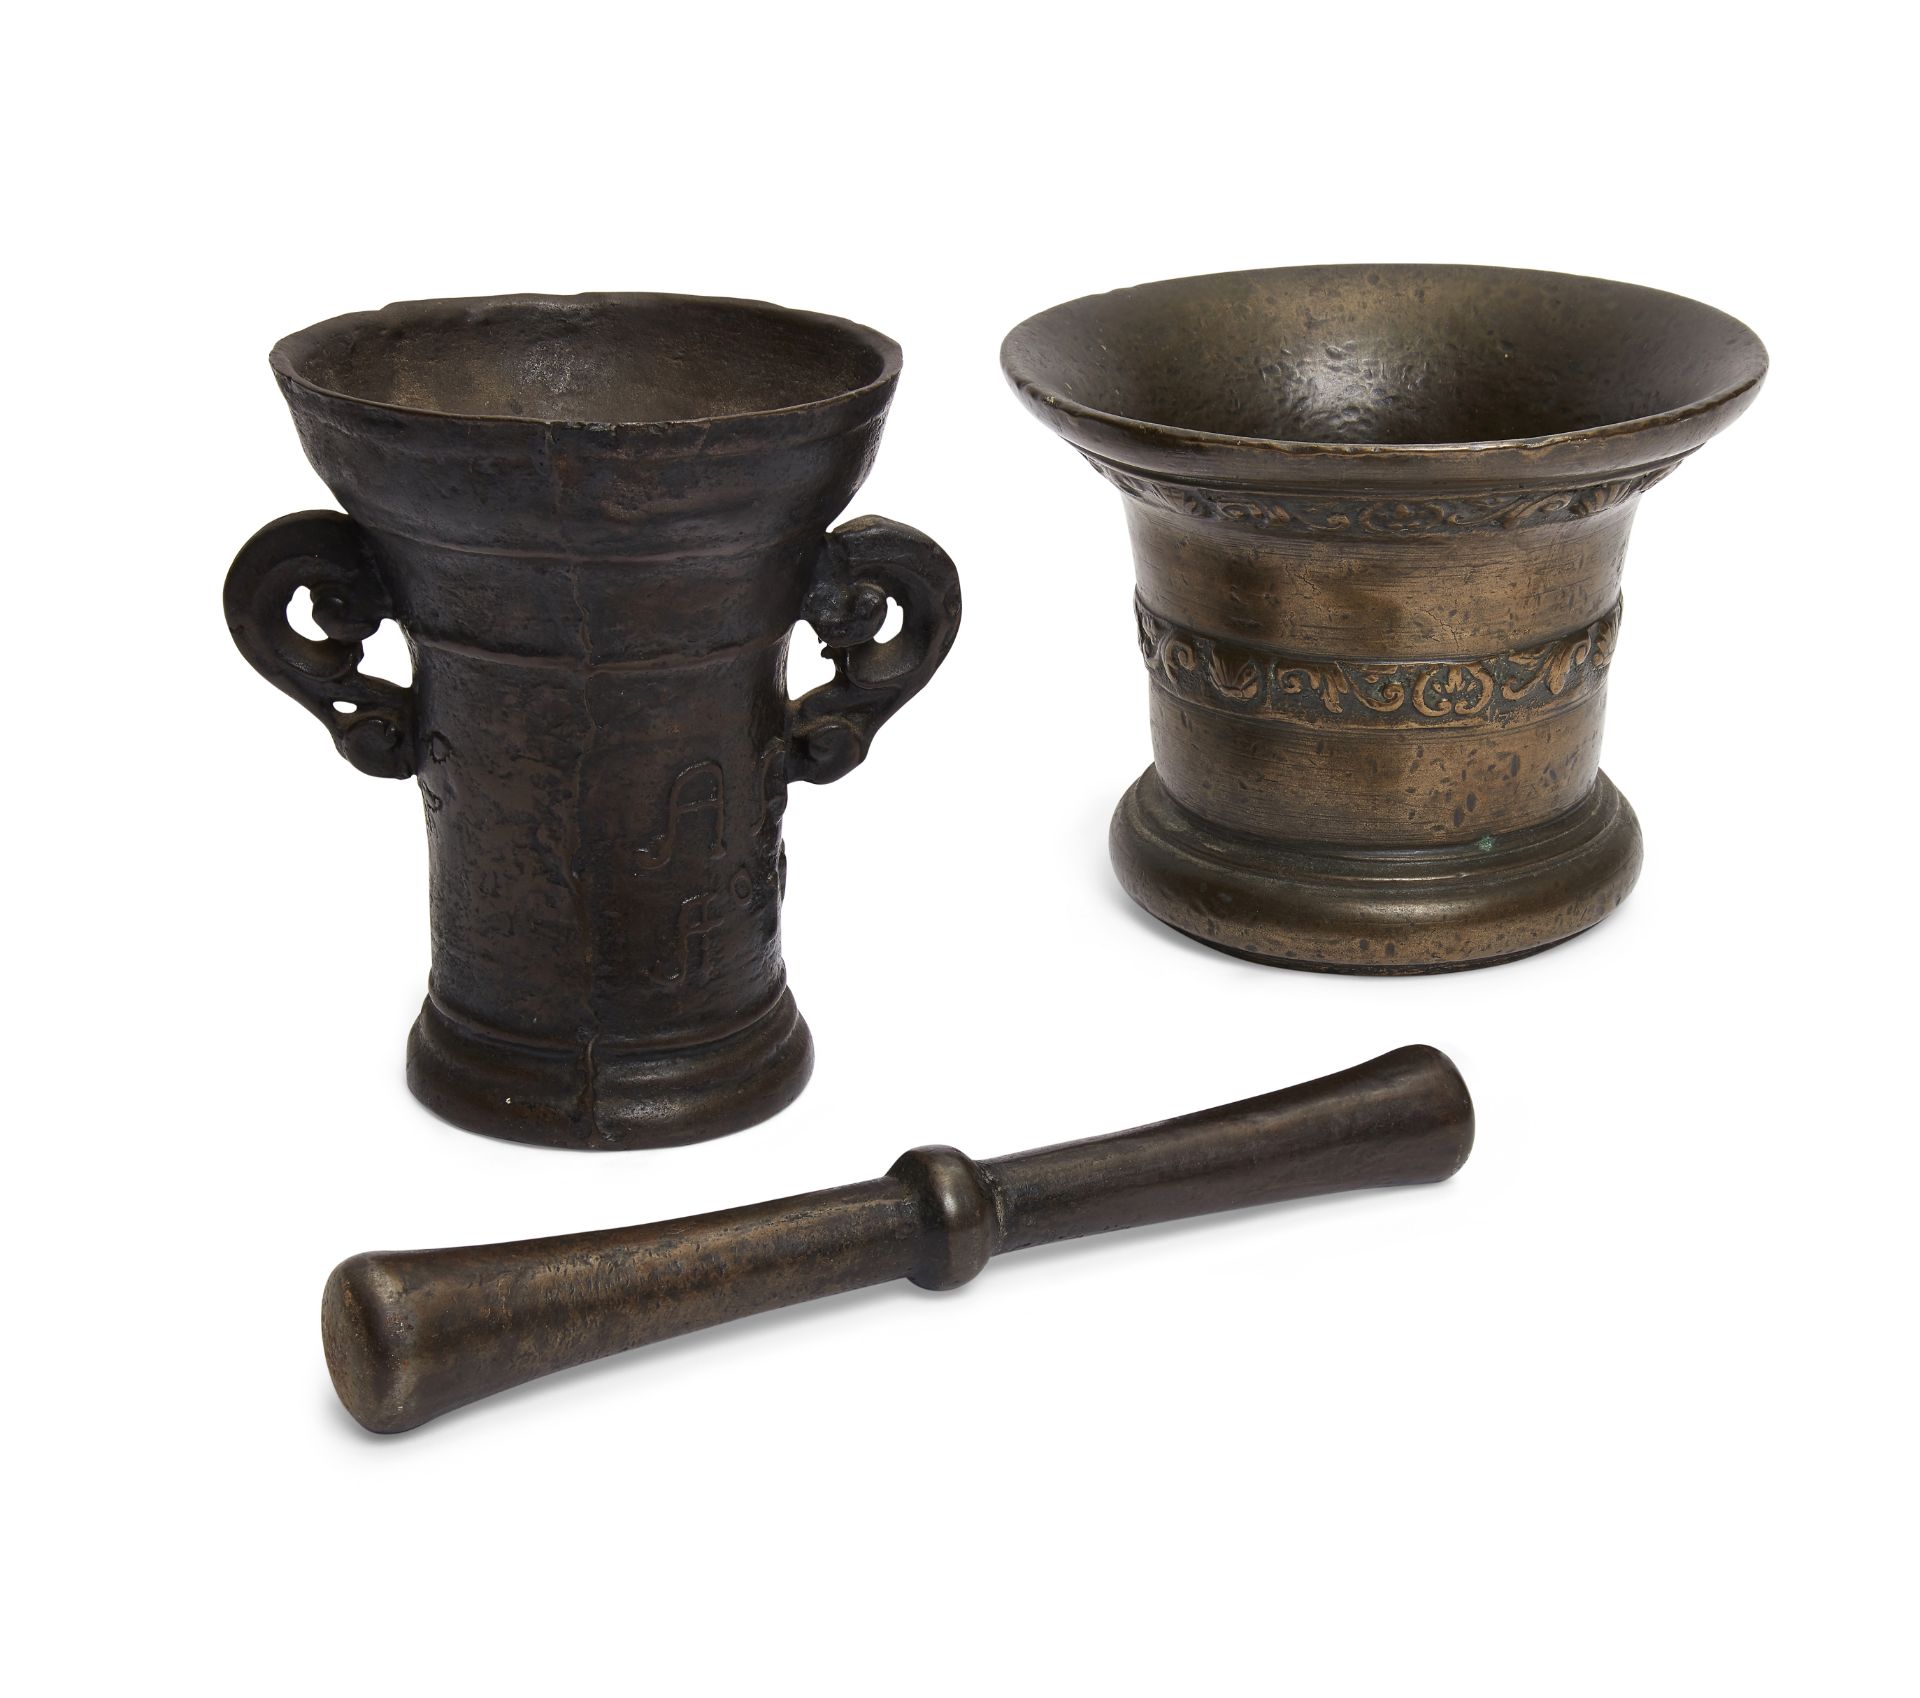 A Dutch/Flemish bronze mortar, 18th century, cast with two bands of scrolls and shells, 14cm high...